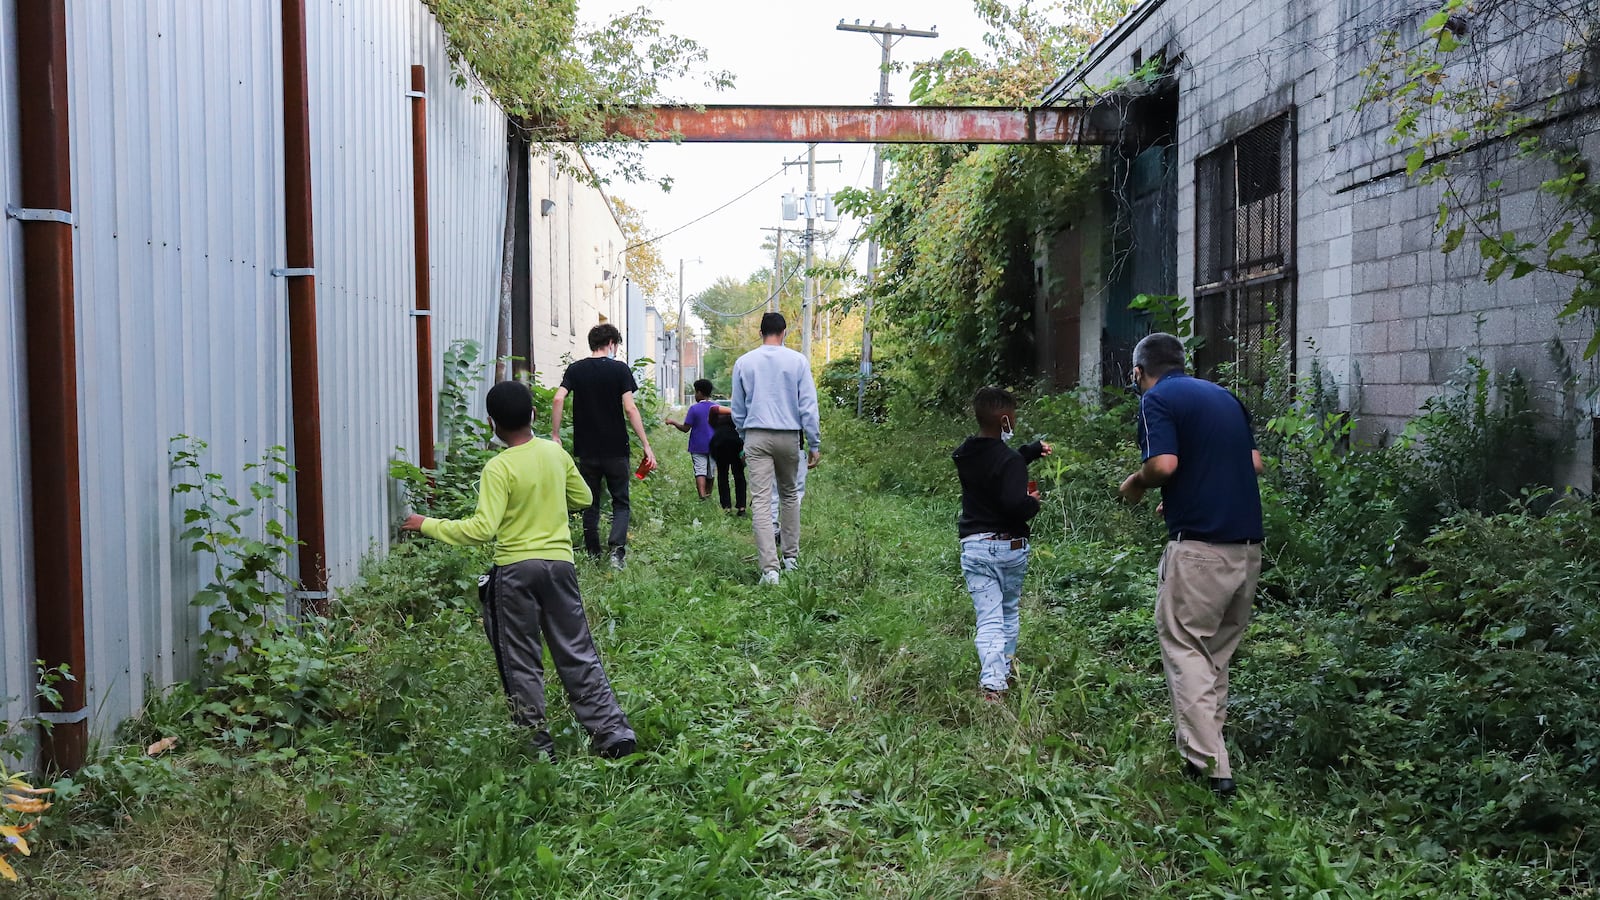 Students and teachers walk down a green patch between two industrial buildings off-set from one another.